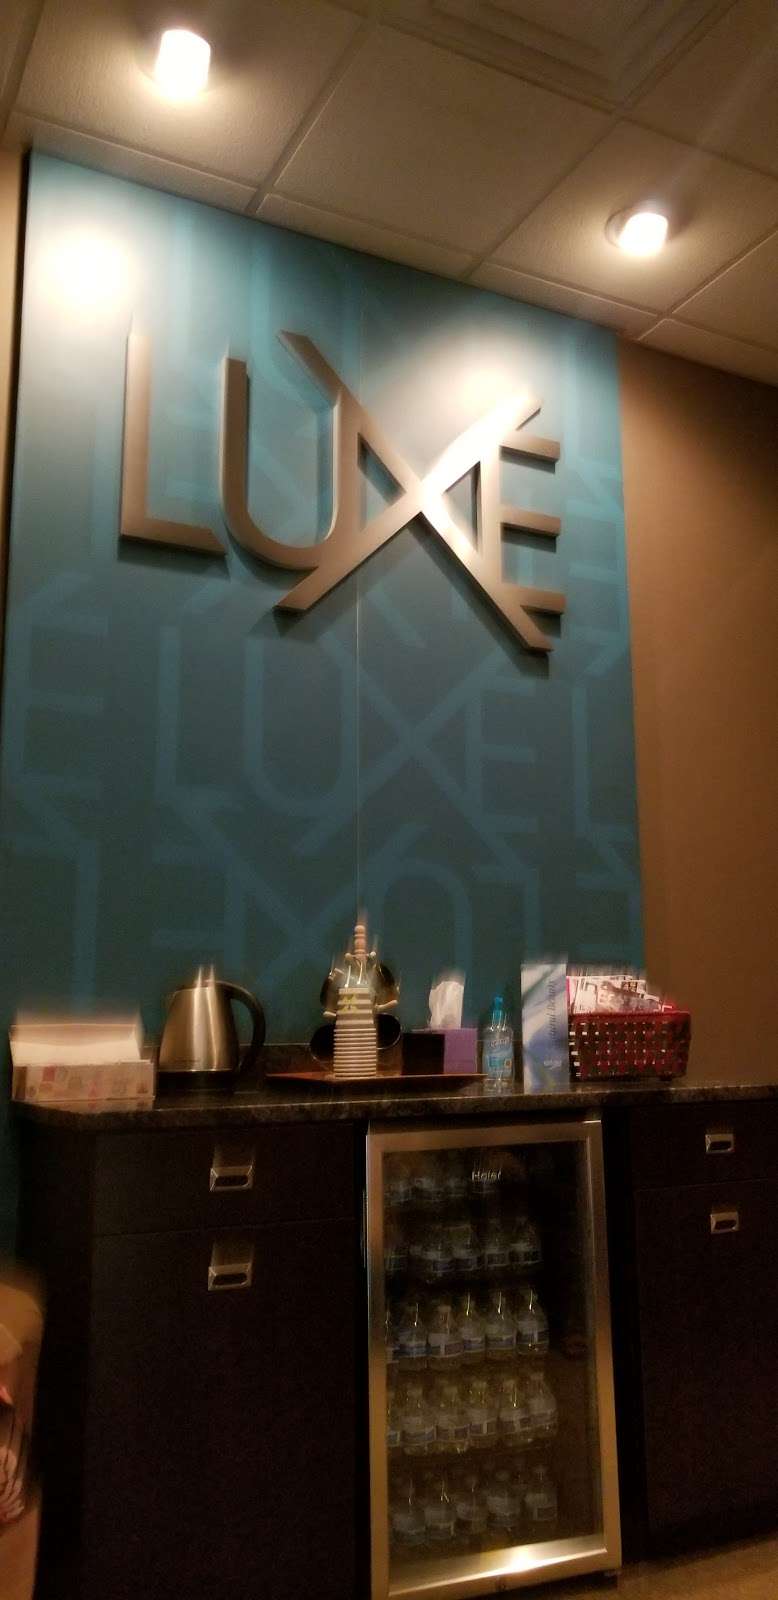 Massage LuXe | 7181 Kingery Hwy, Willowbrook, IL 60527, USA | Phone: (630) 455-4090